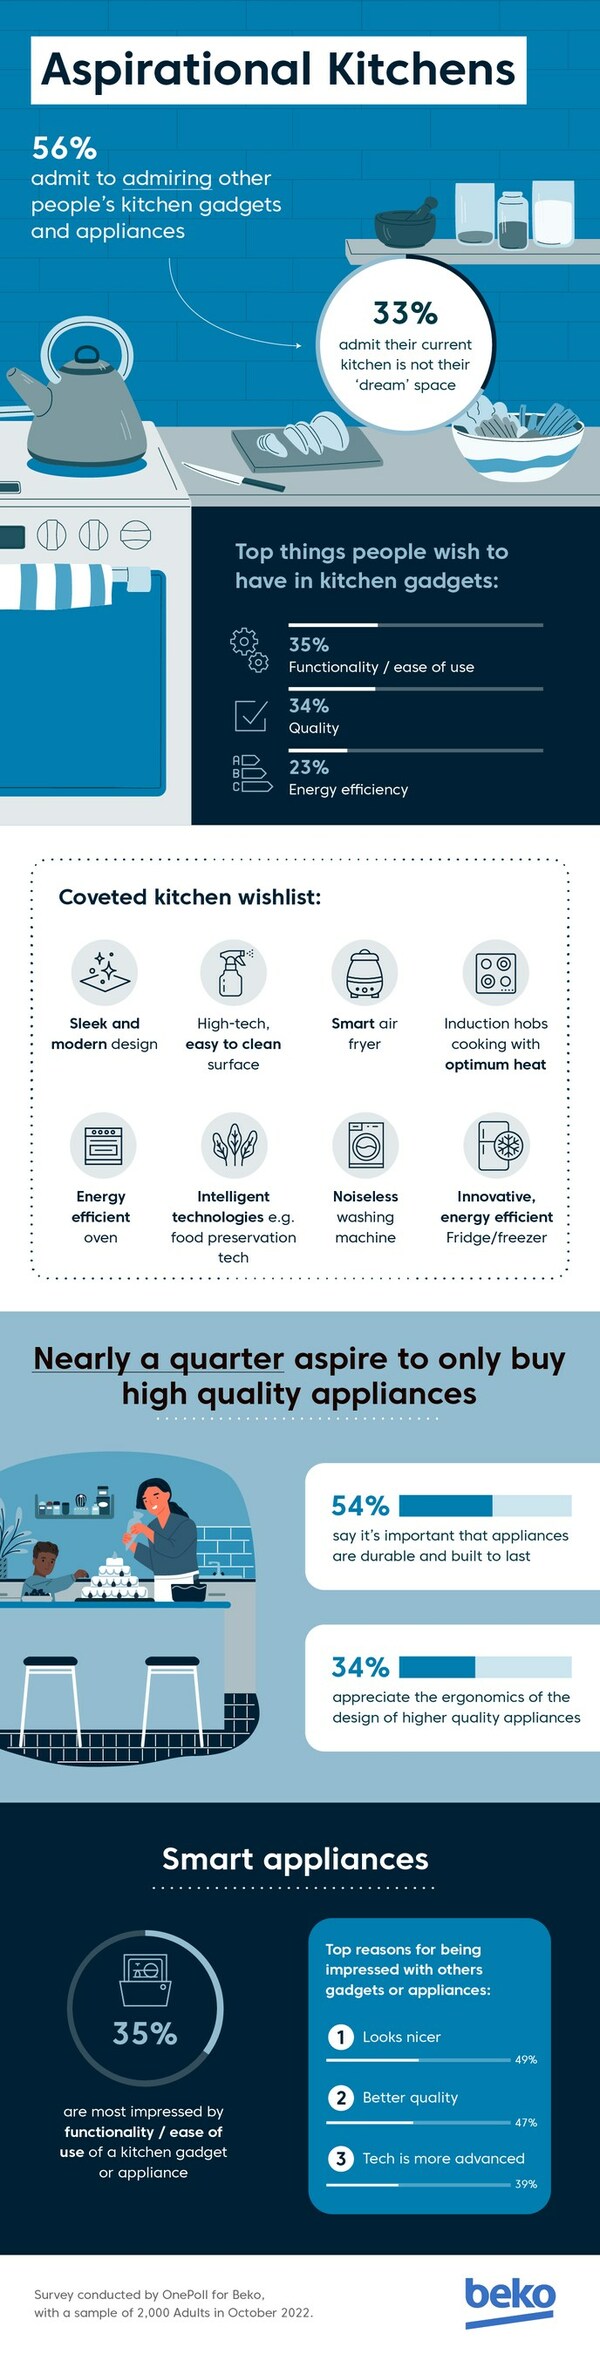 Beko reveals consumers avoid wasteful, passing kitchen trends in favour of durable, quality designs